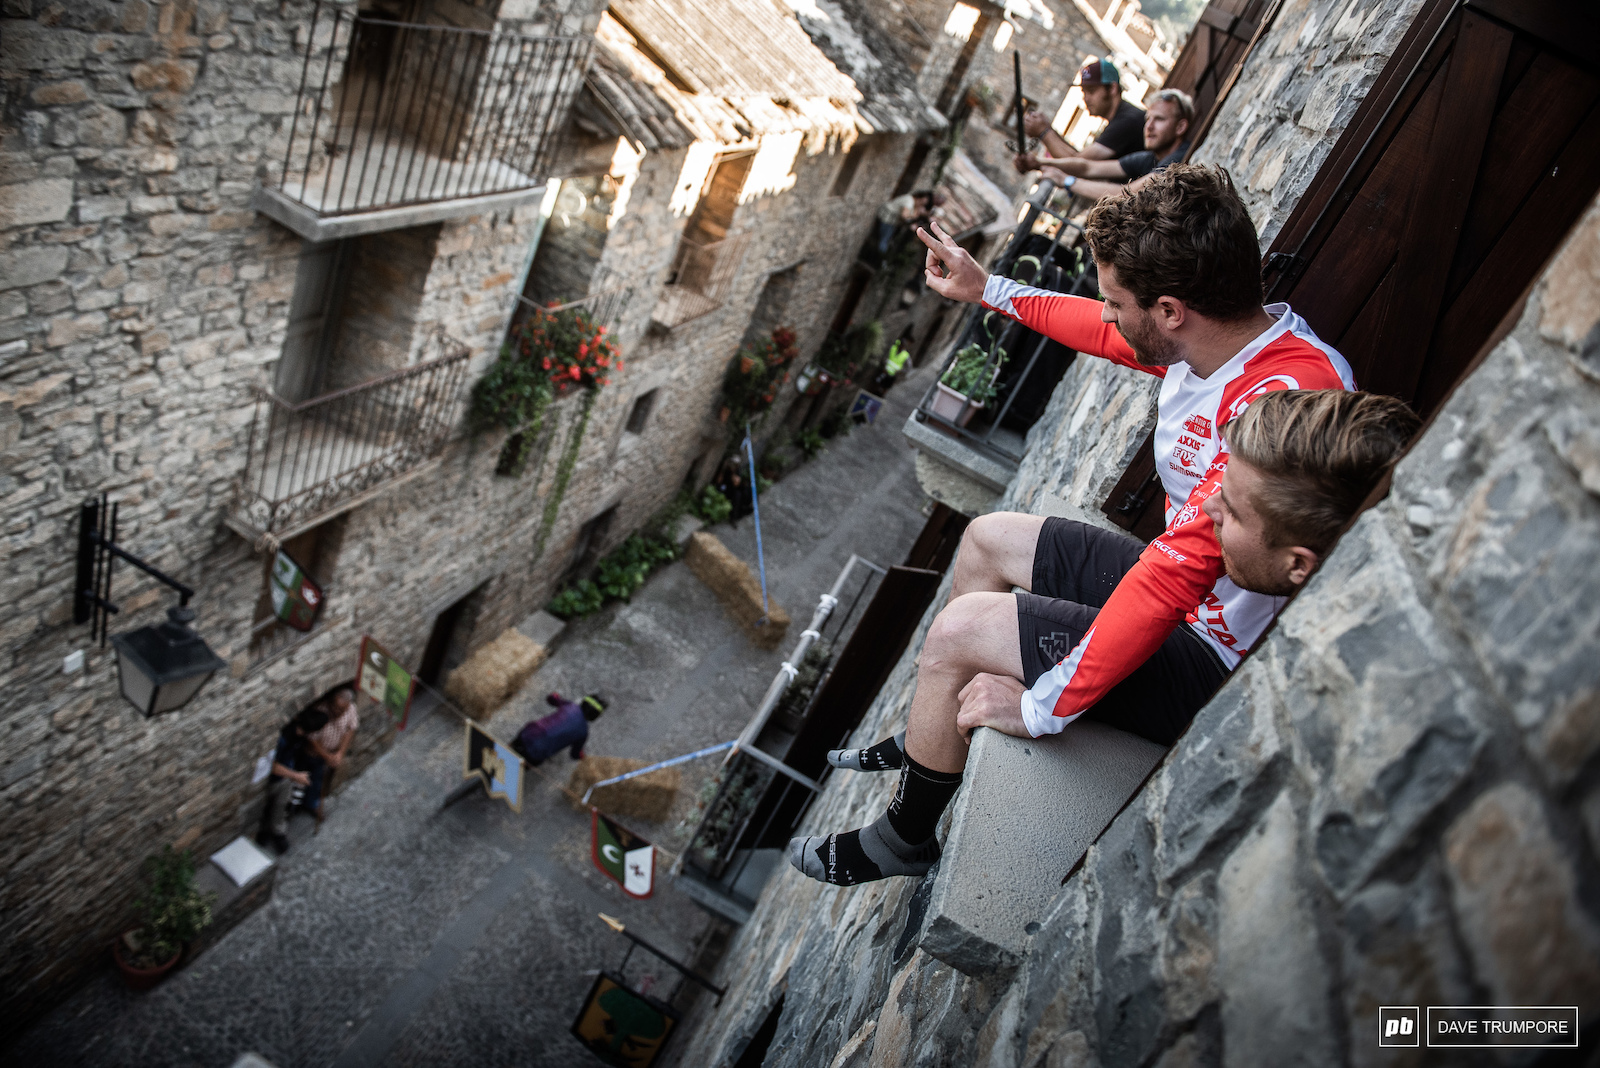 Jesse Melamed and Remi Gauvin enjoy a birds eye view of the prologue from their apartment window.